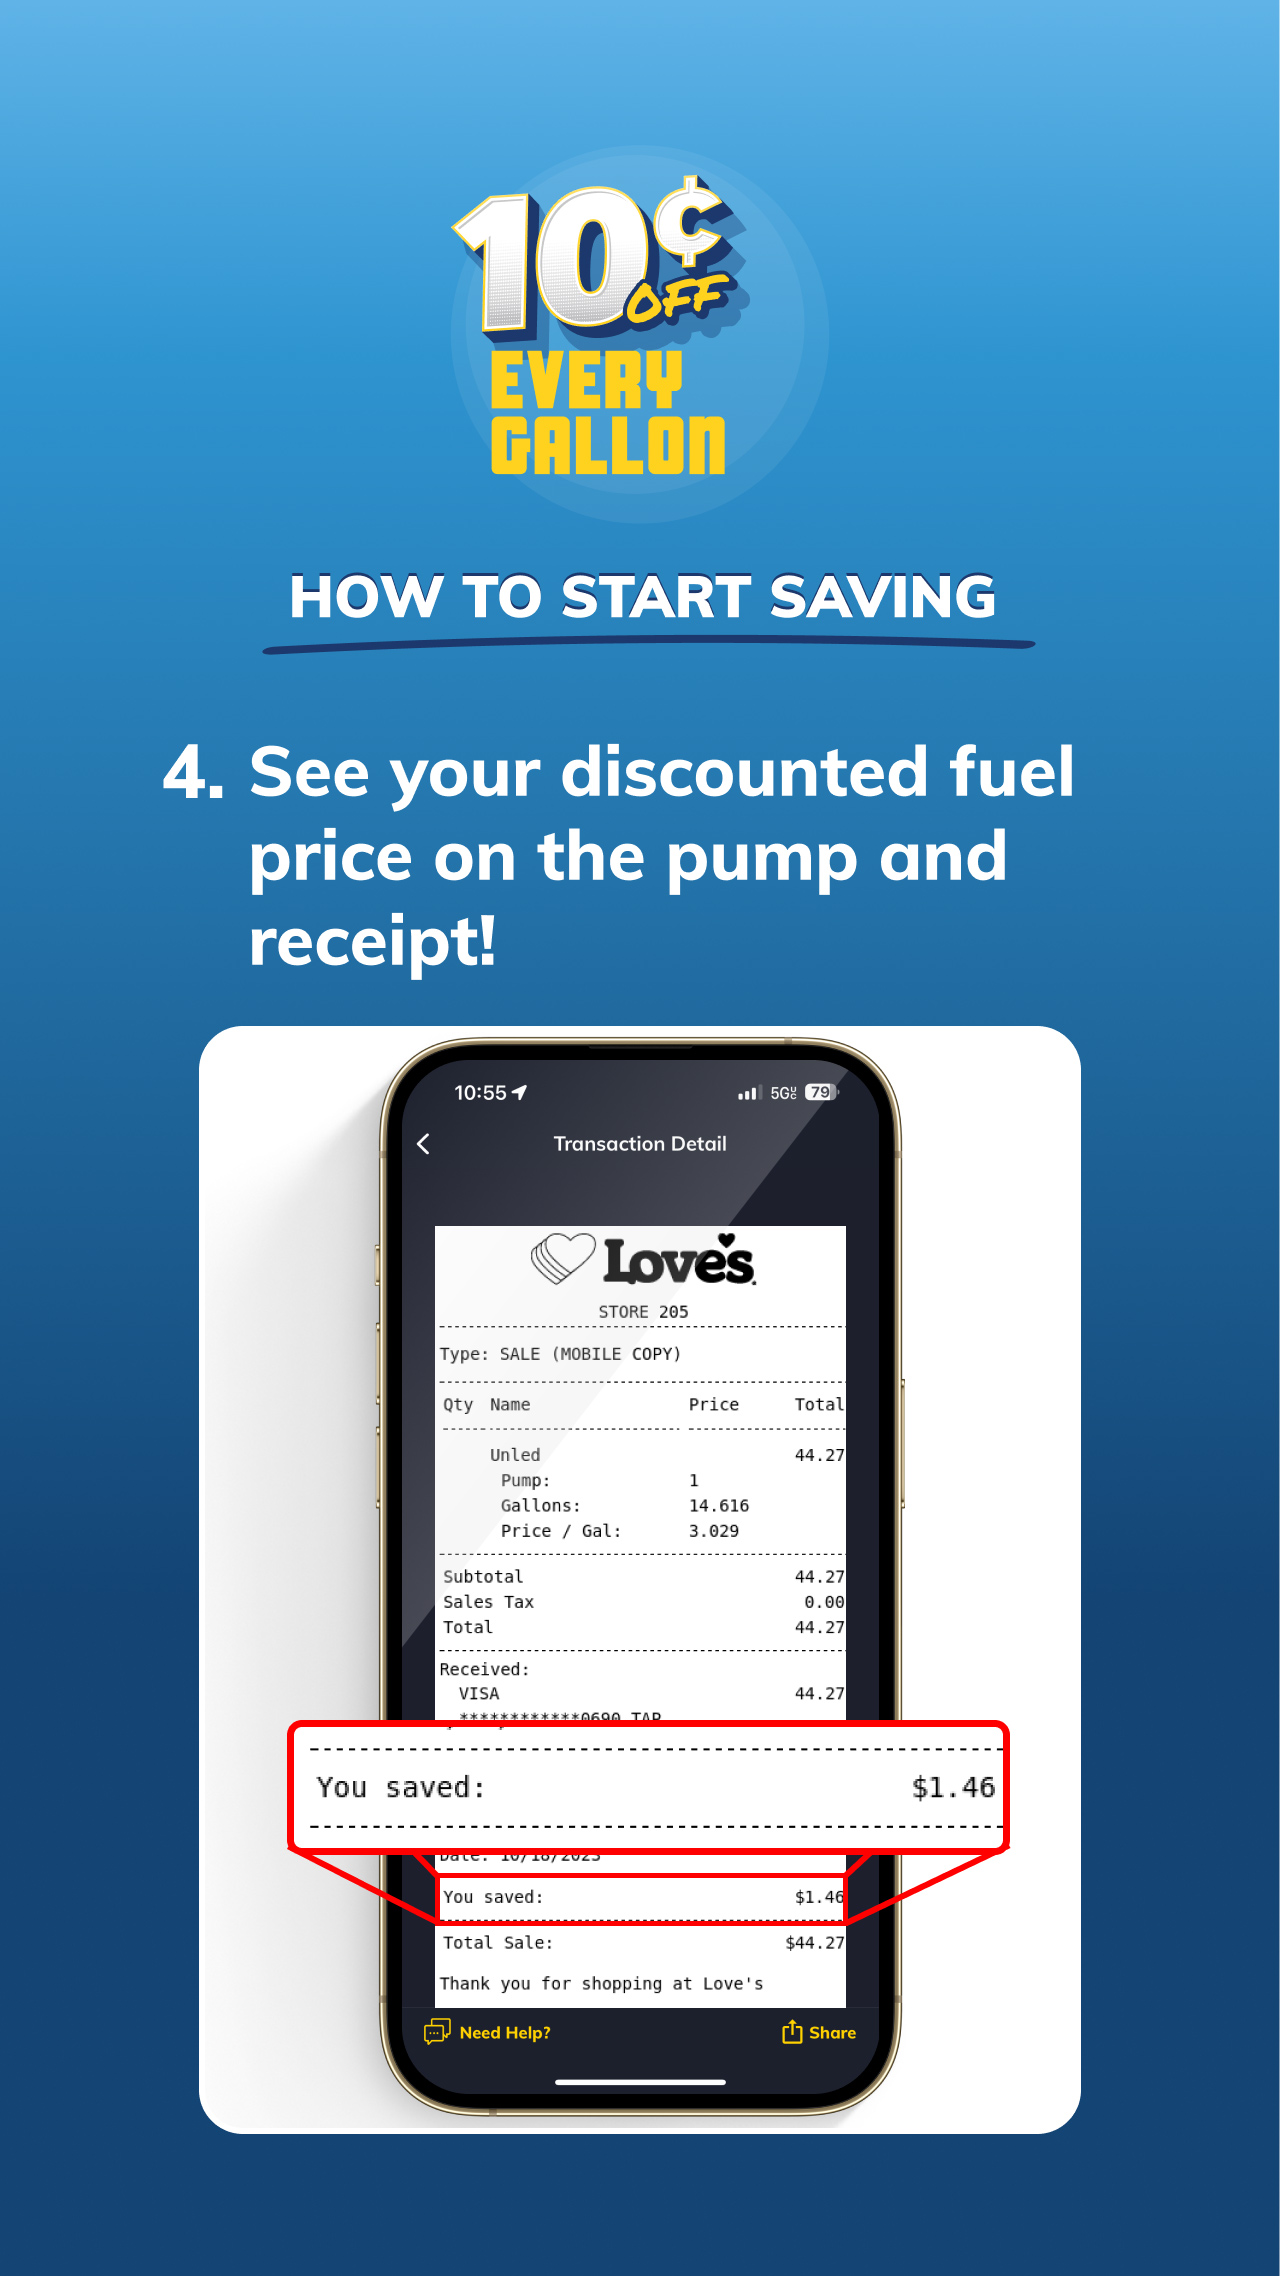 Step by step guide to saving 10¢ at the pump - showing your savings on the Love's Connect App